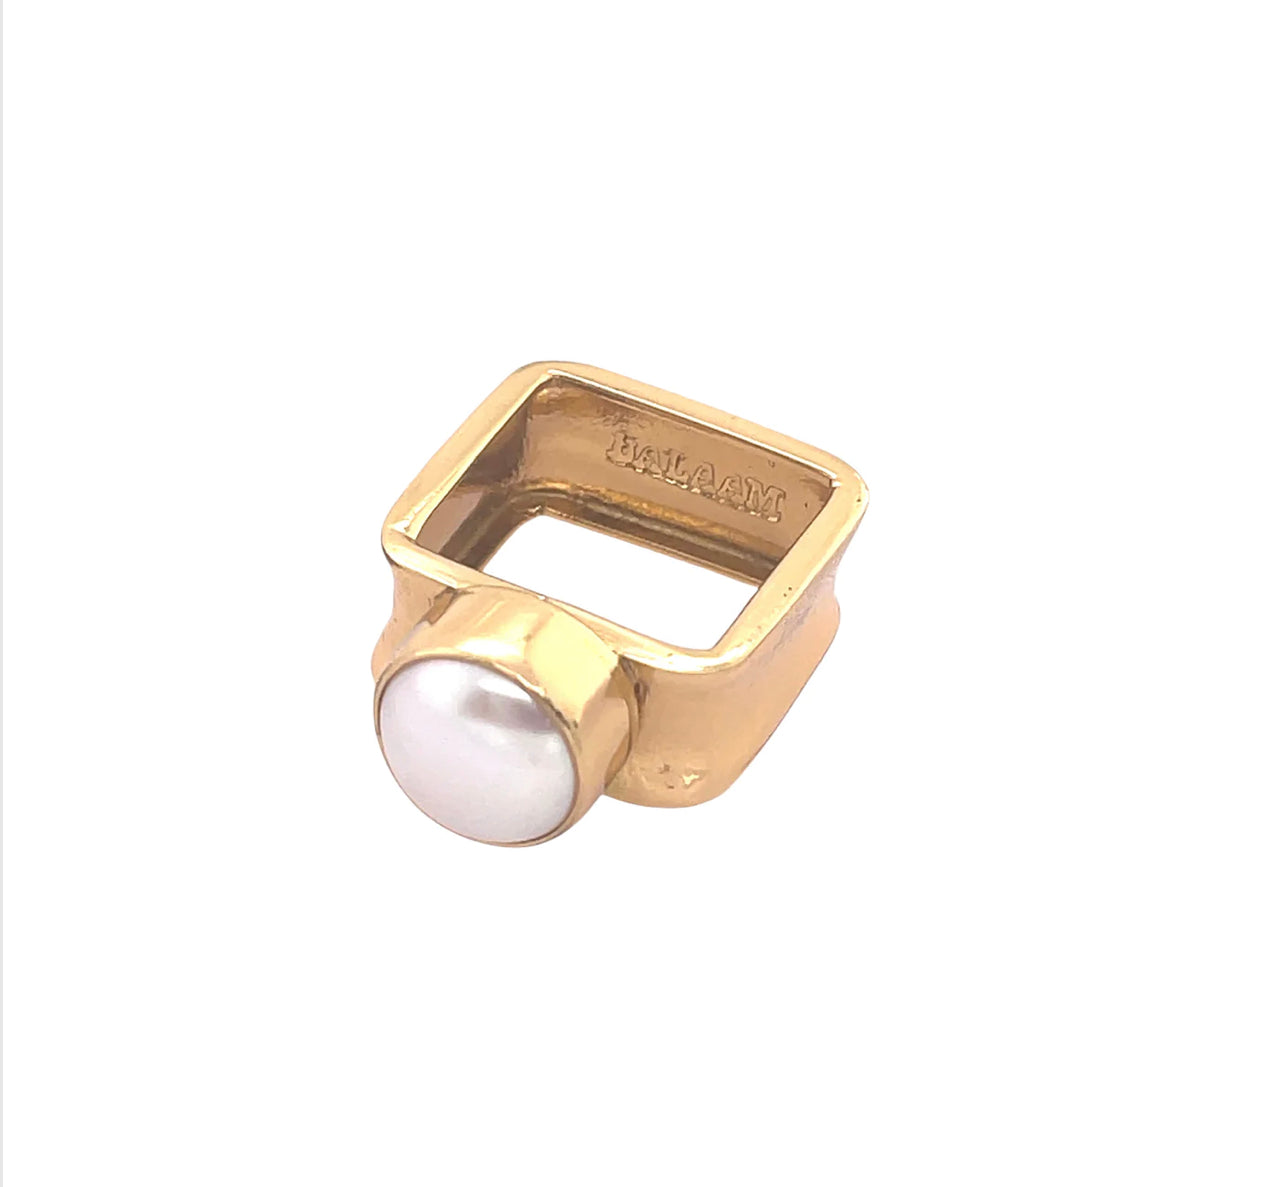 gold ring with bezel set laying flat